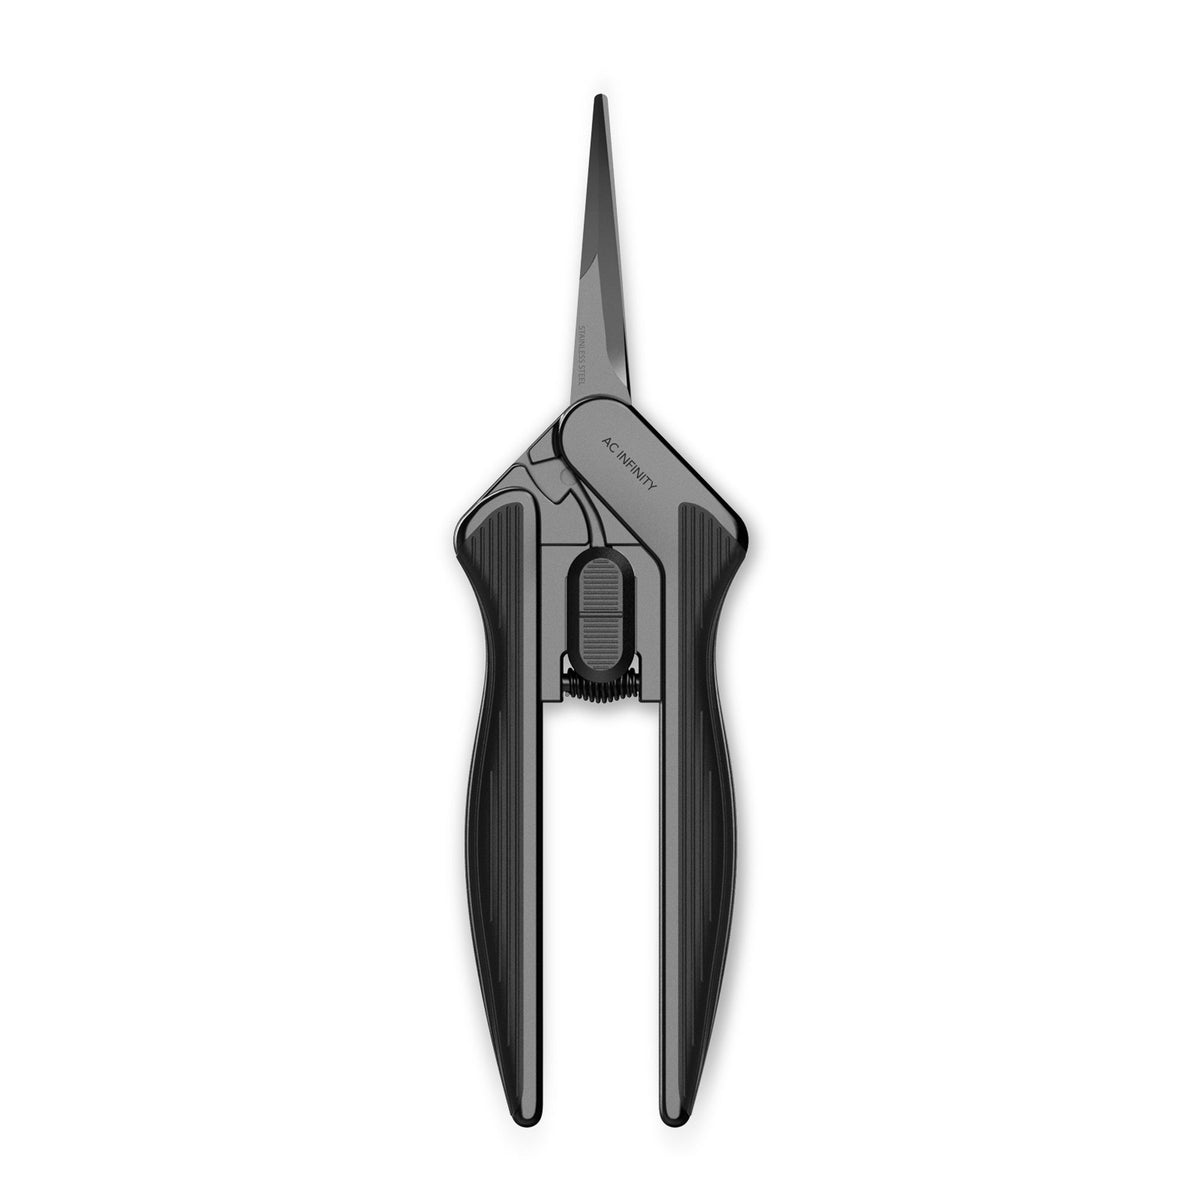 AC Infinity AC Infinity Stainless Steel Pruning Shear Trimming Scissors Main